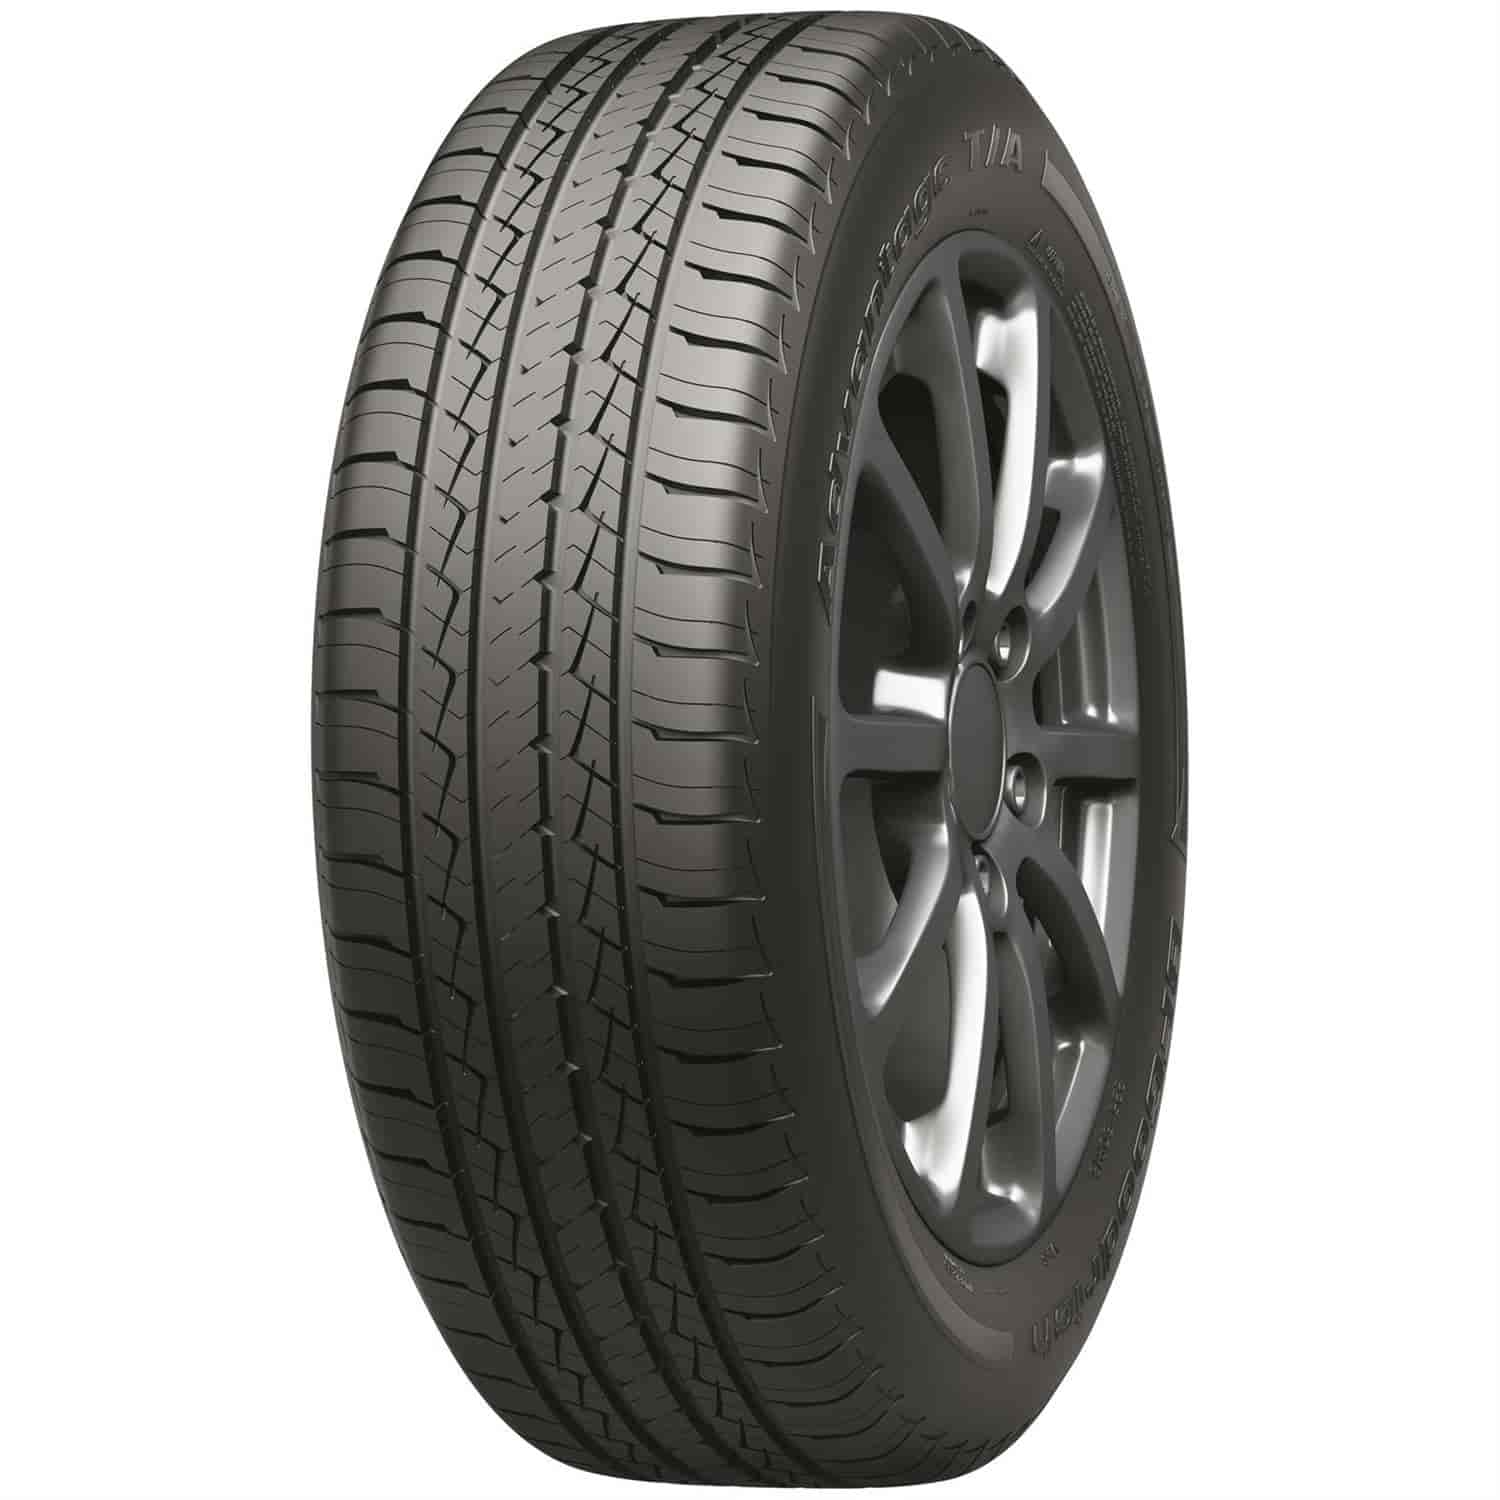 Radial T/A Spec Tire 245/55R18